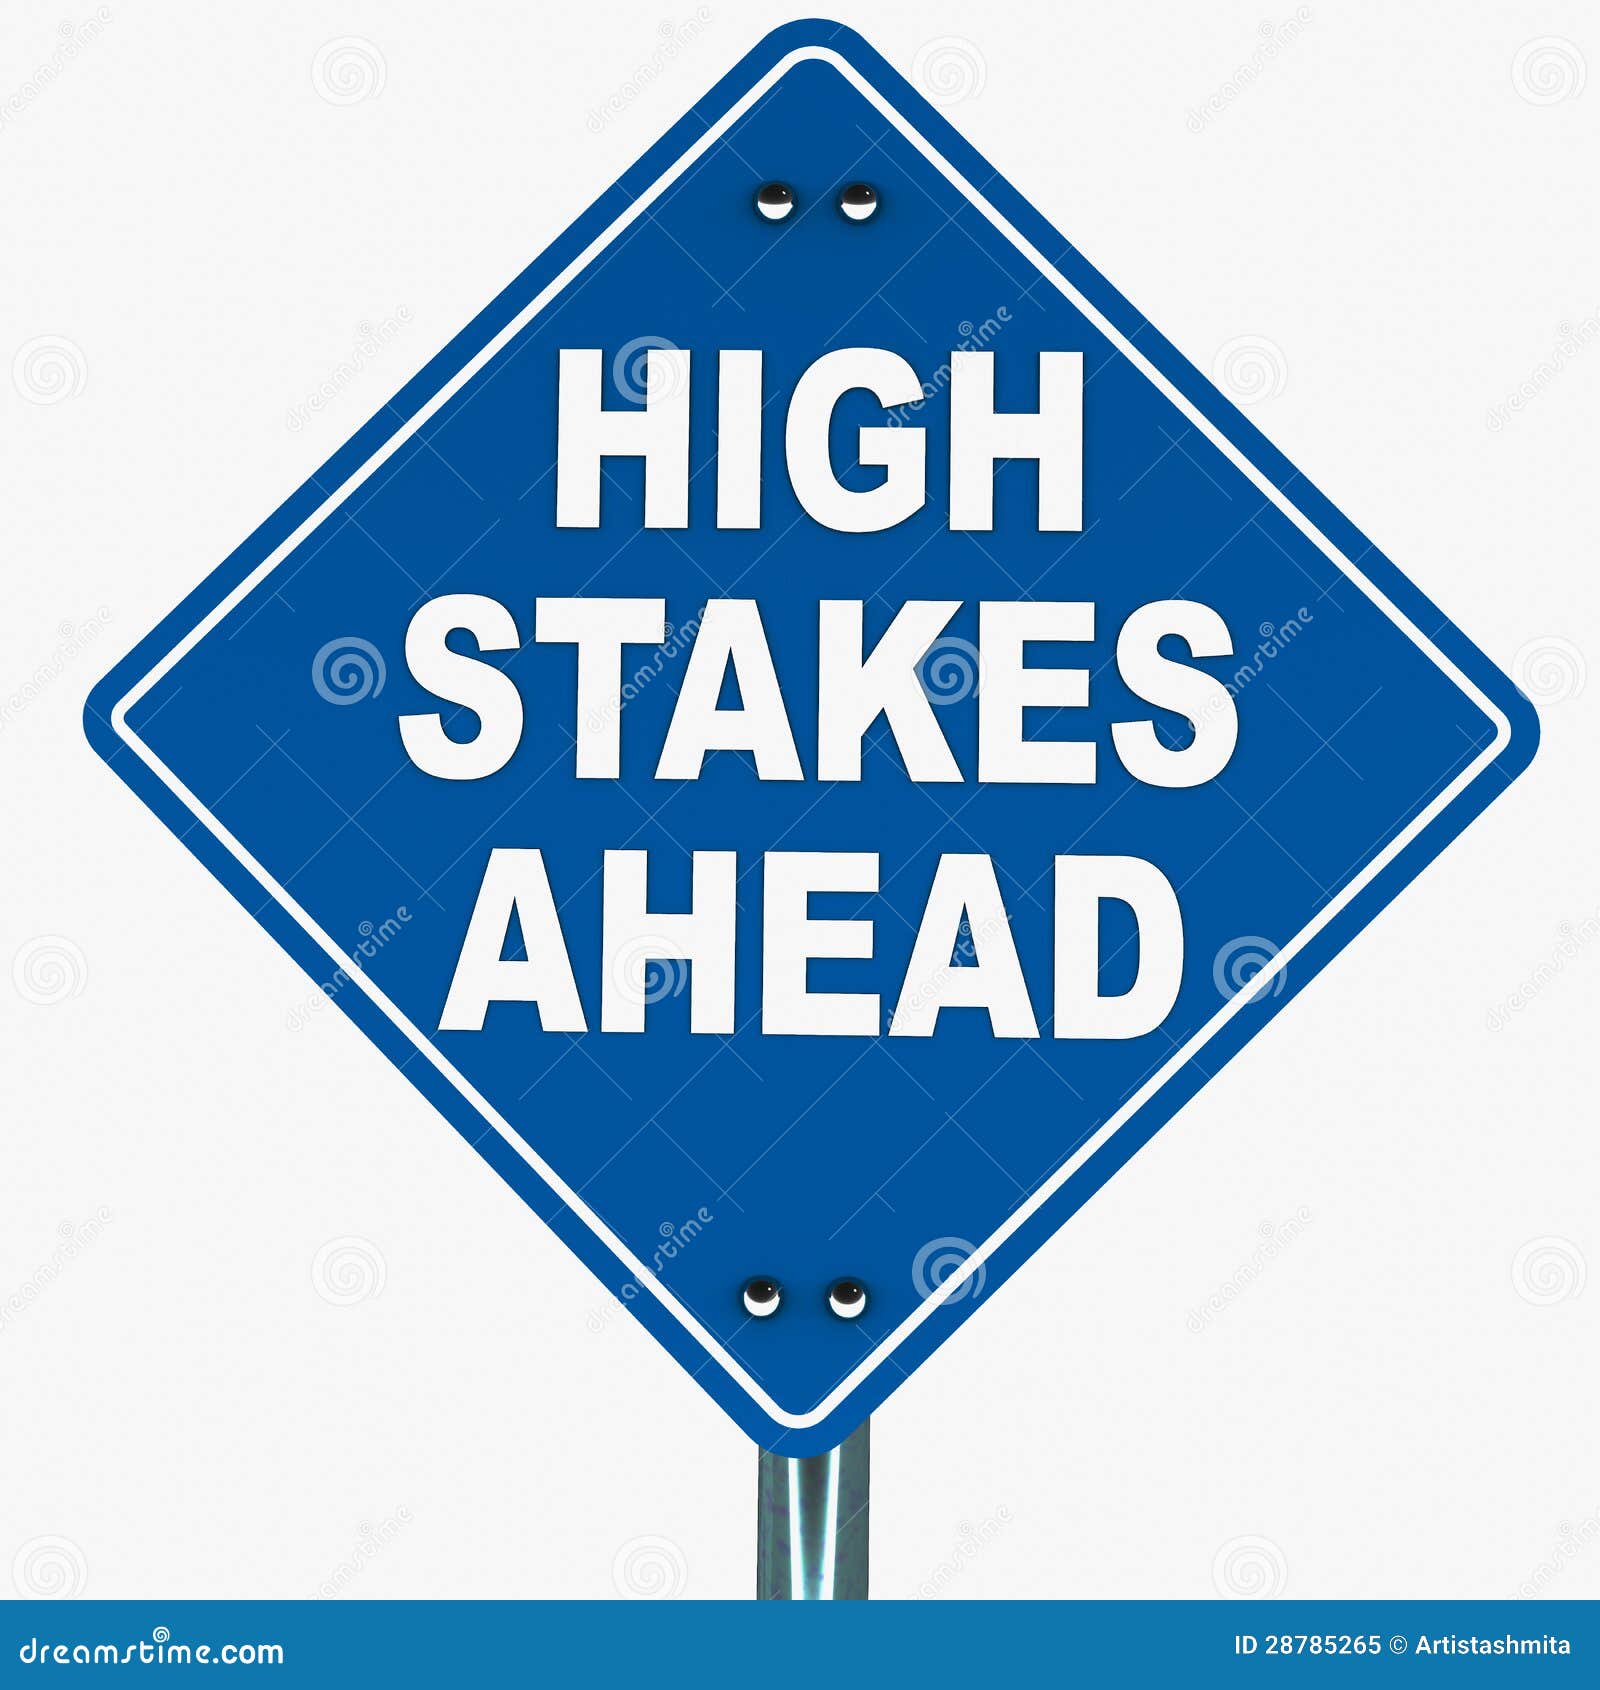 Why Everything You Know About High Stakes Poker Site Is A Lie